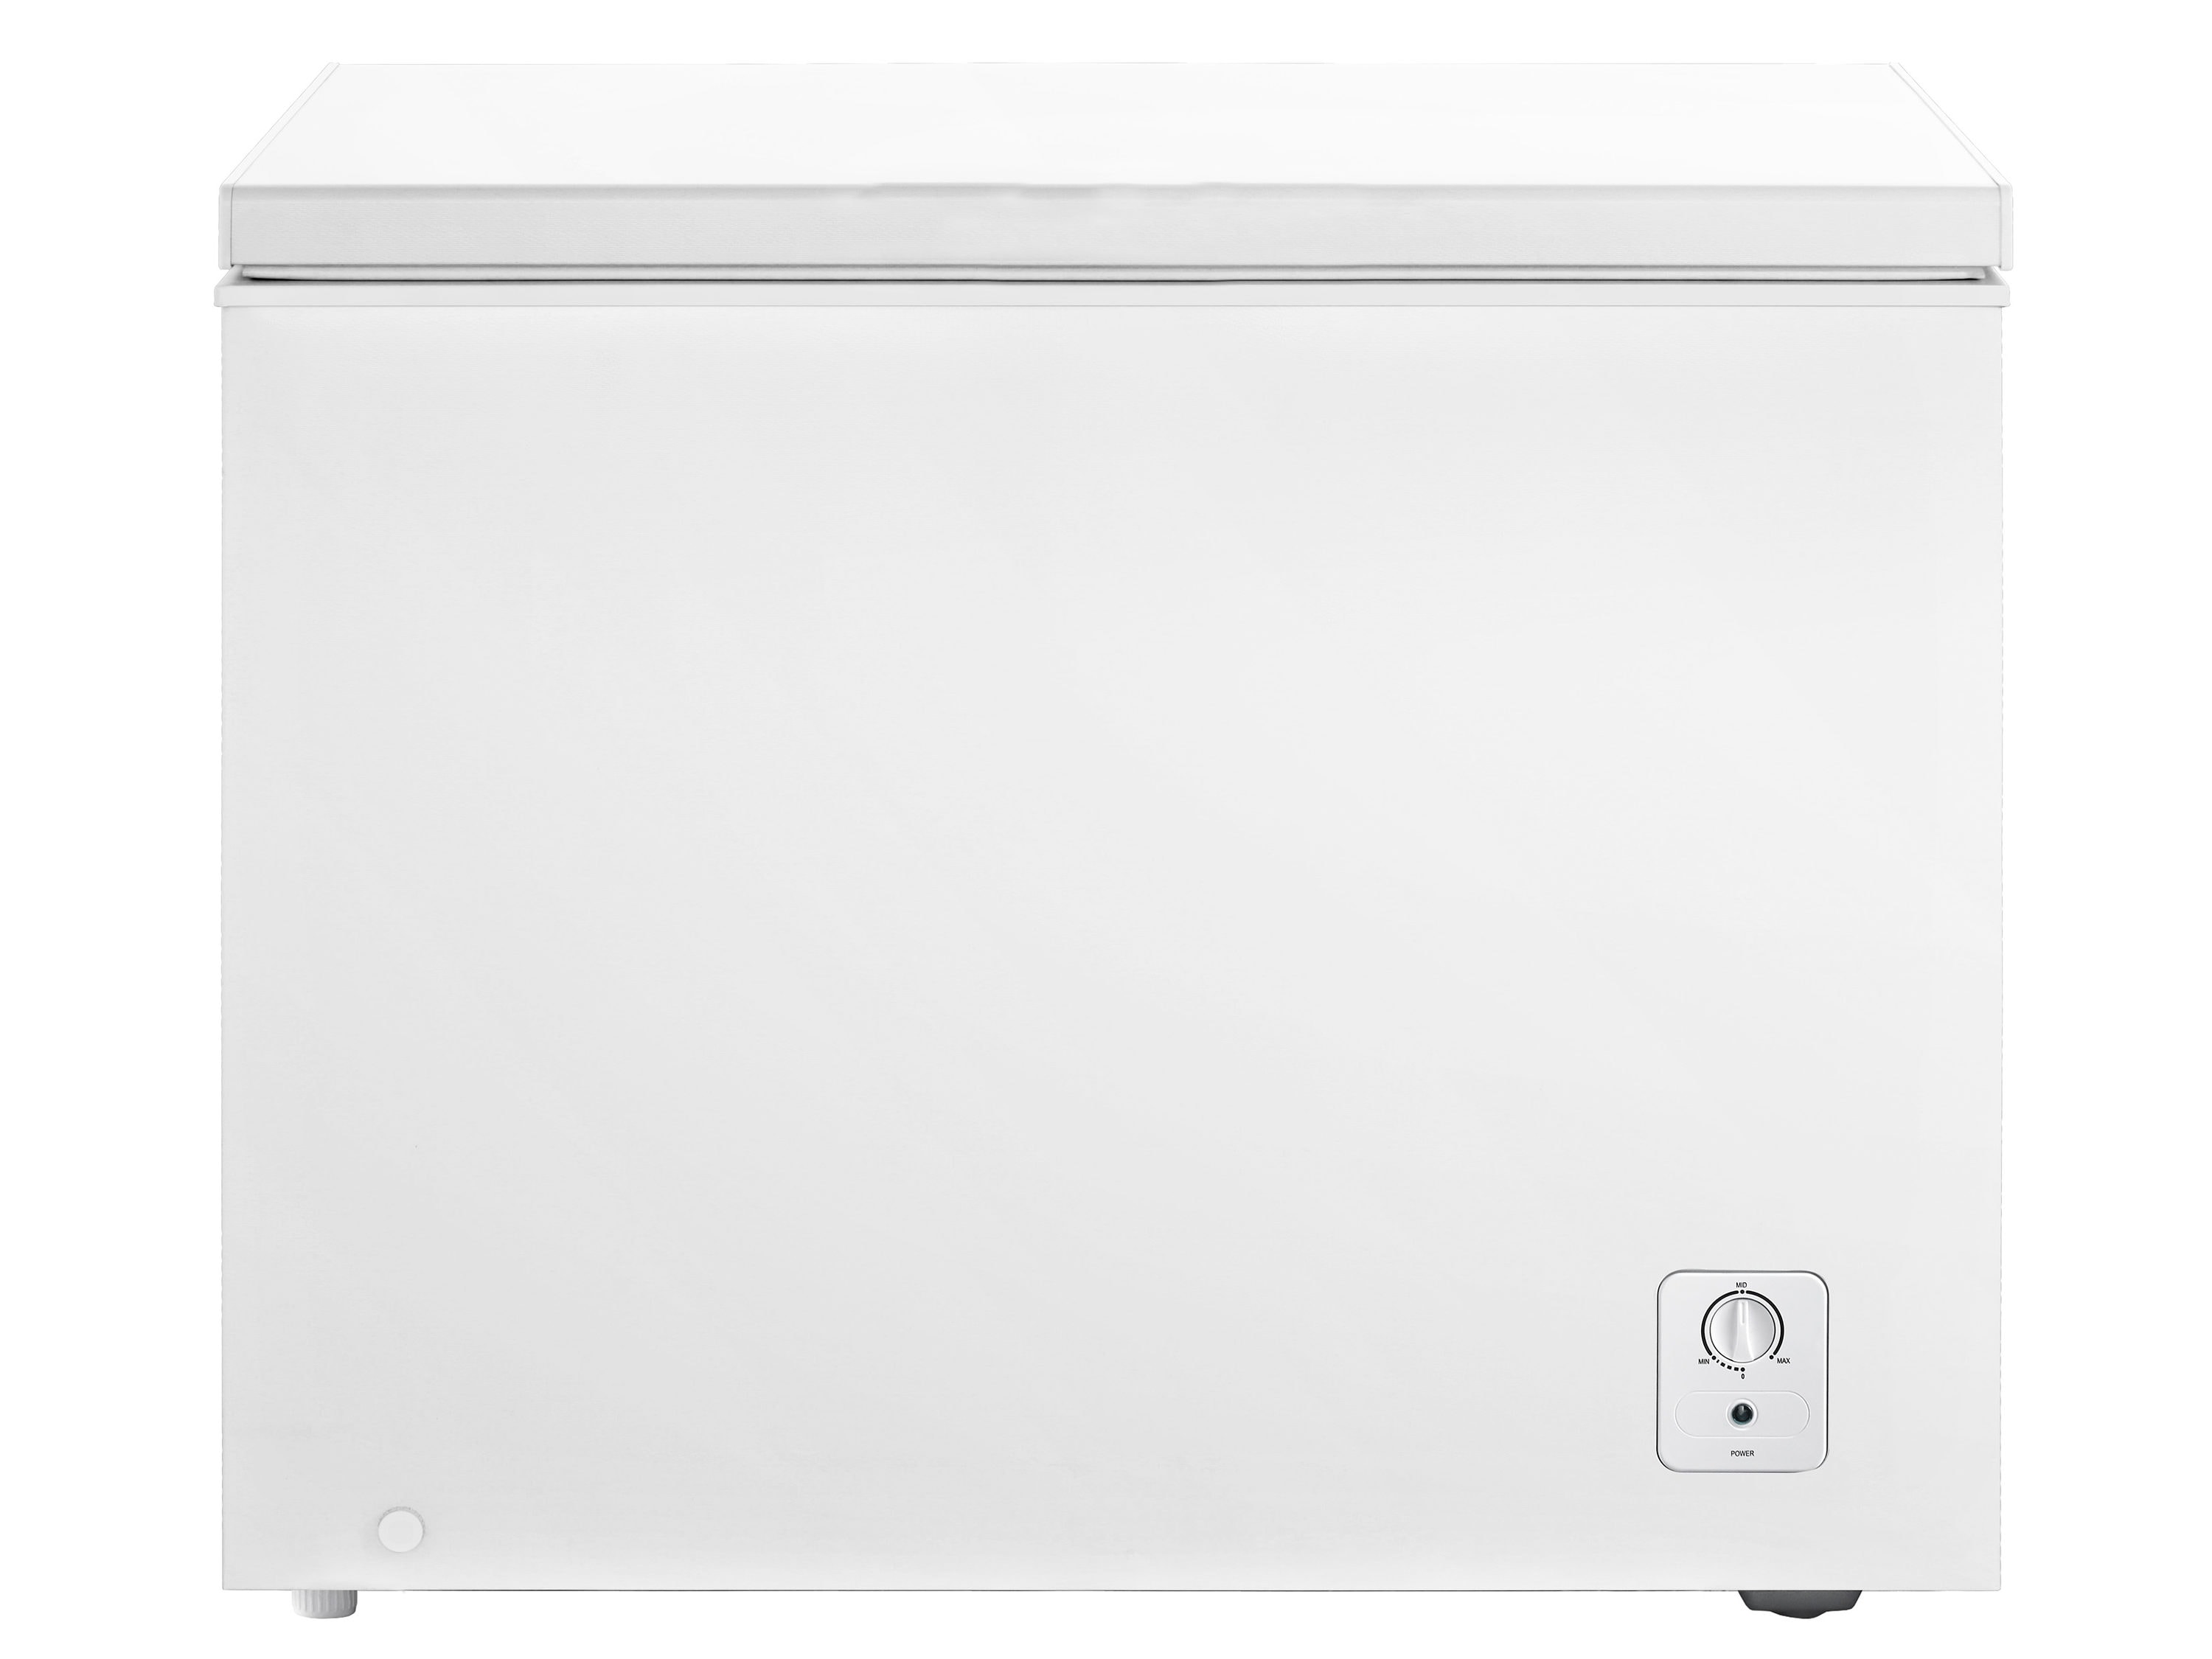 Hisense 8 7 Cu Ft Manual Defrost Chest Freezer White In The Chest